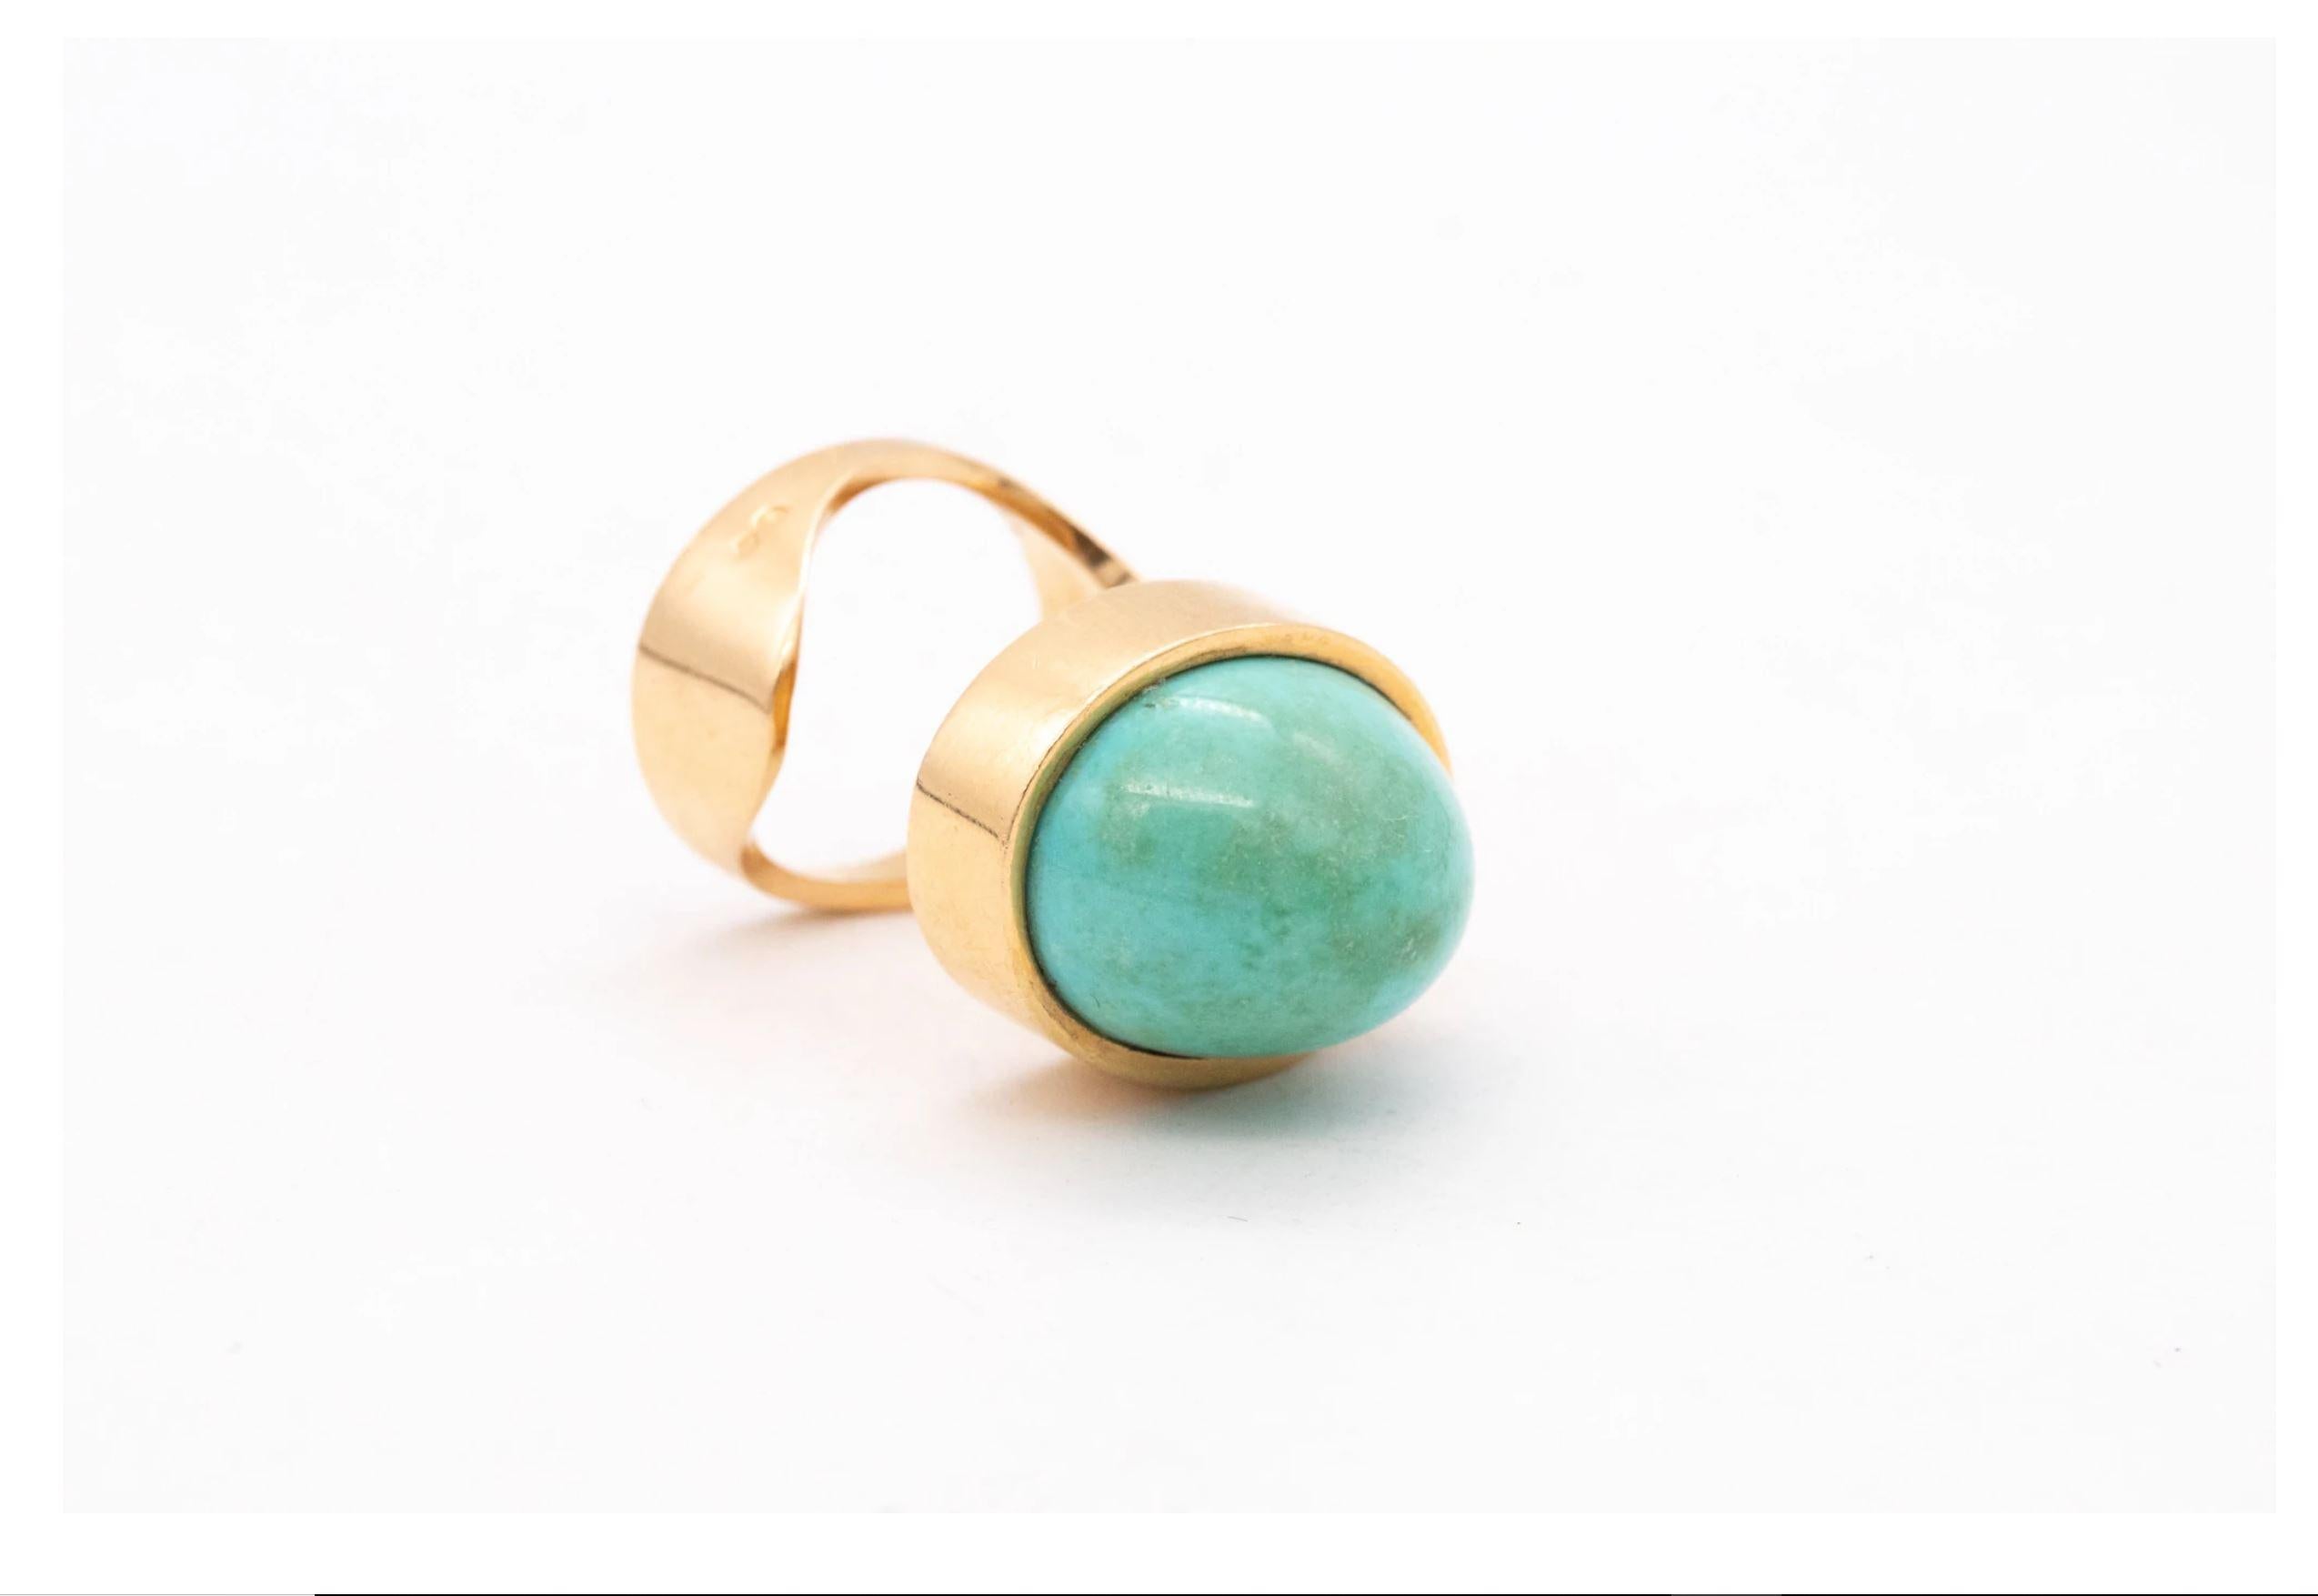 Modernist Dinh Van Paris For Pierre Cardin 1970 Geometric Ring 18Kt Yellow Gold Turquoise